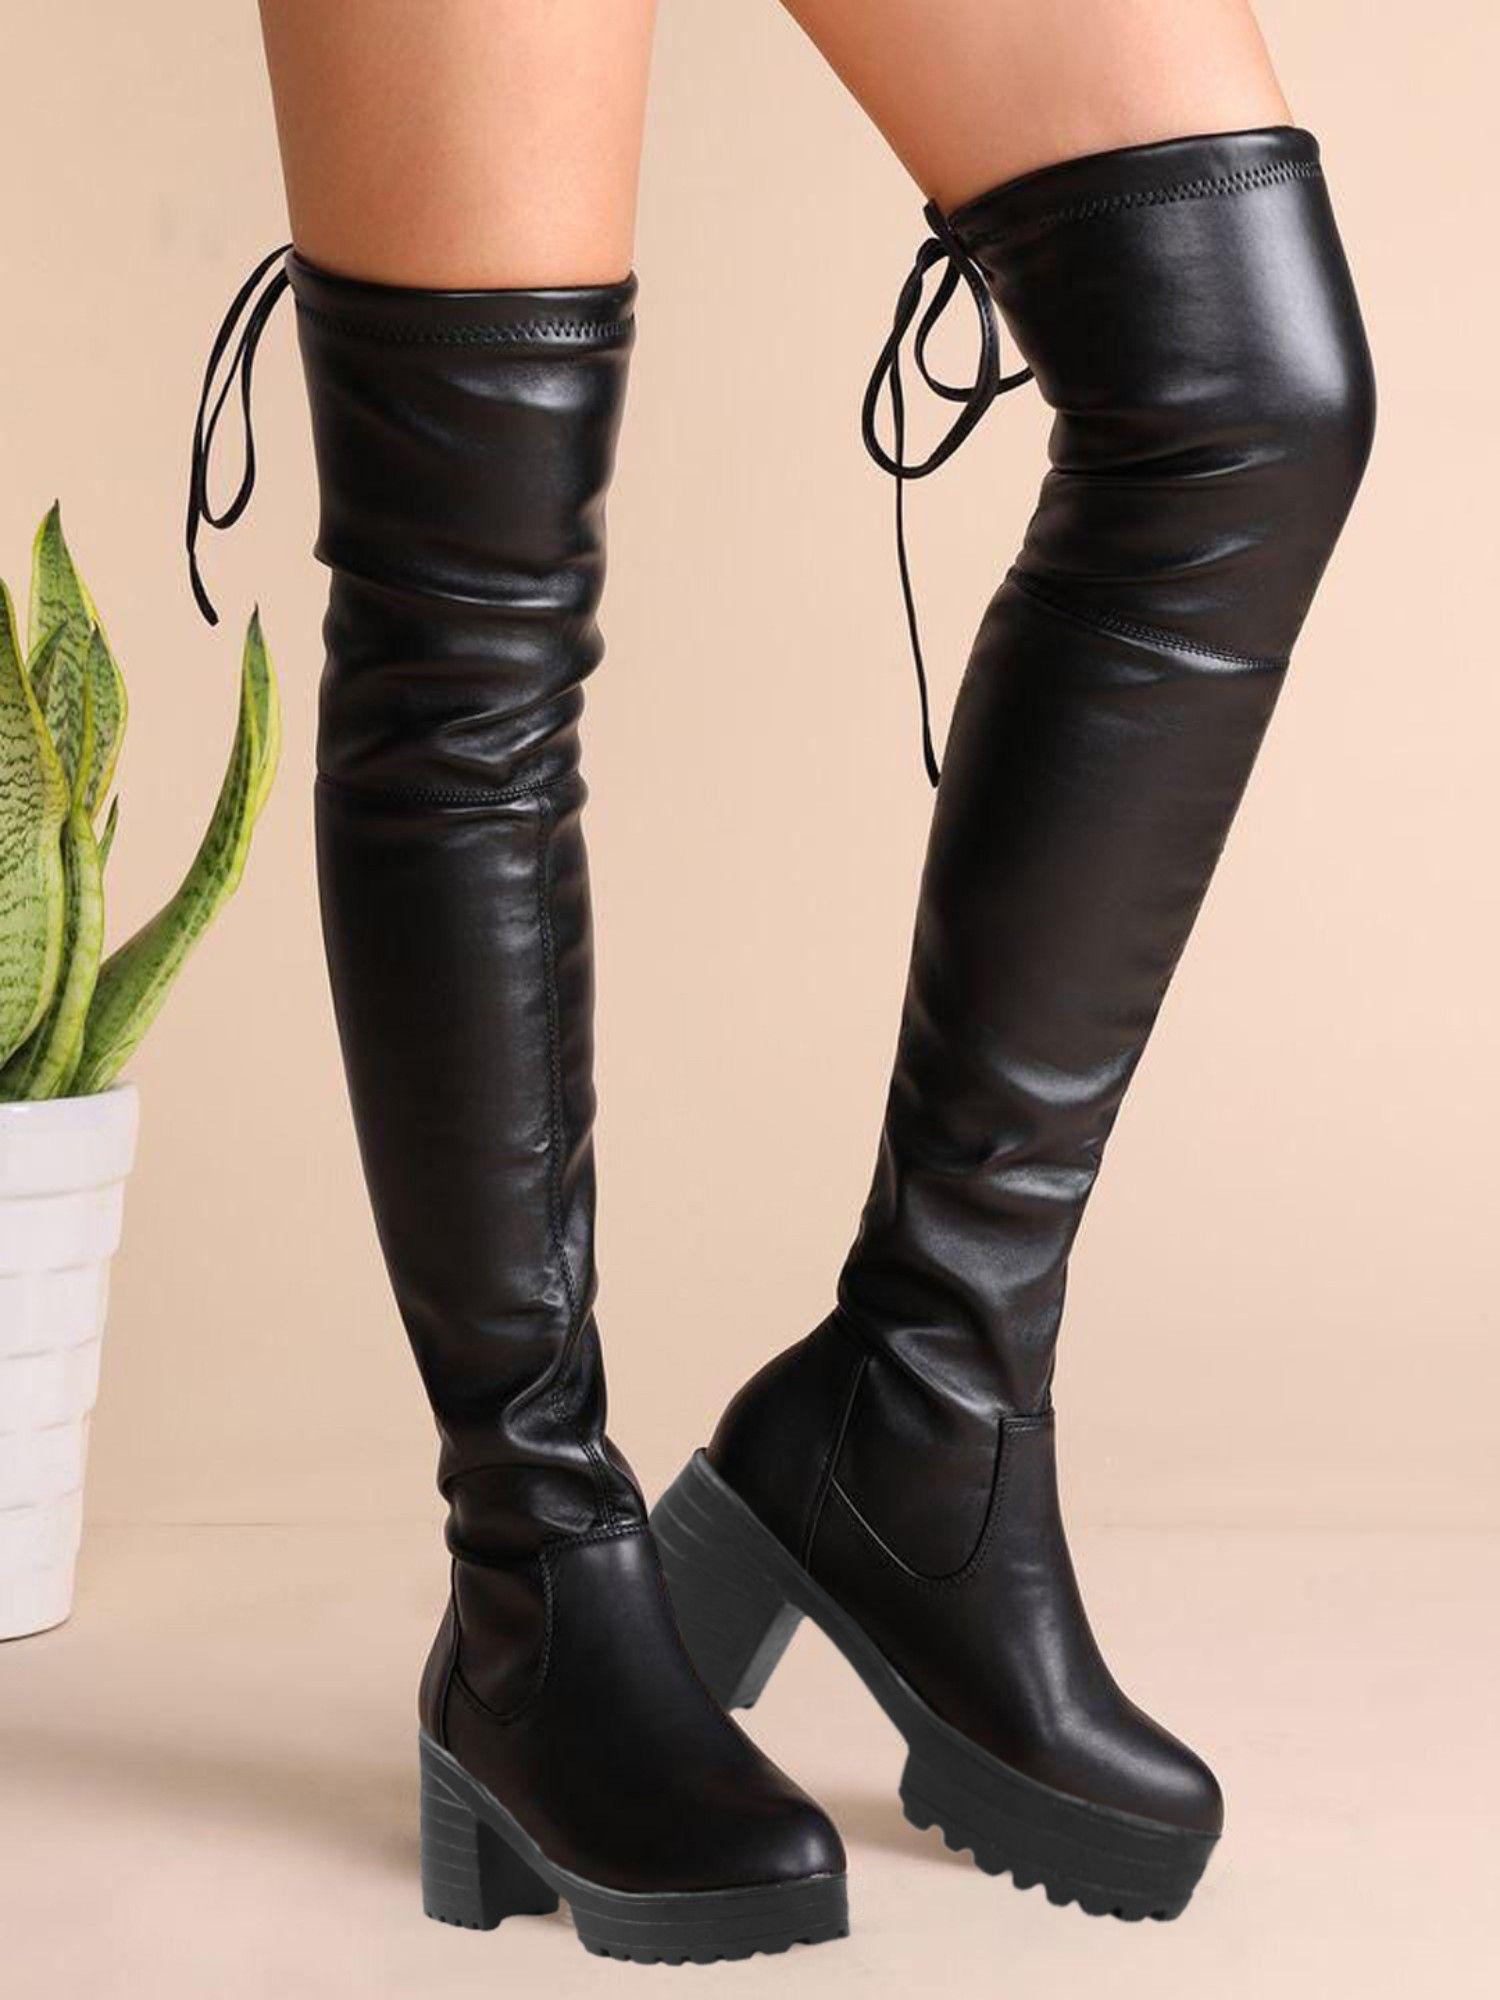 stylish knee high long black boots for girls